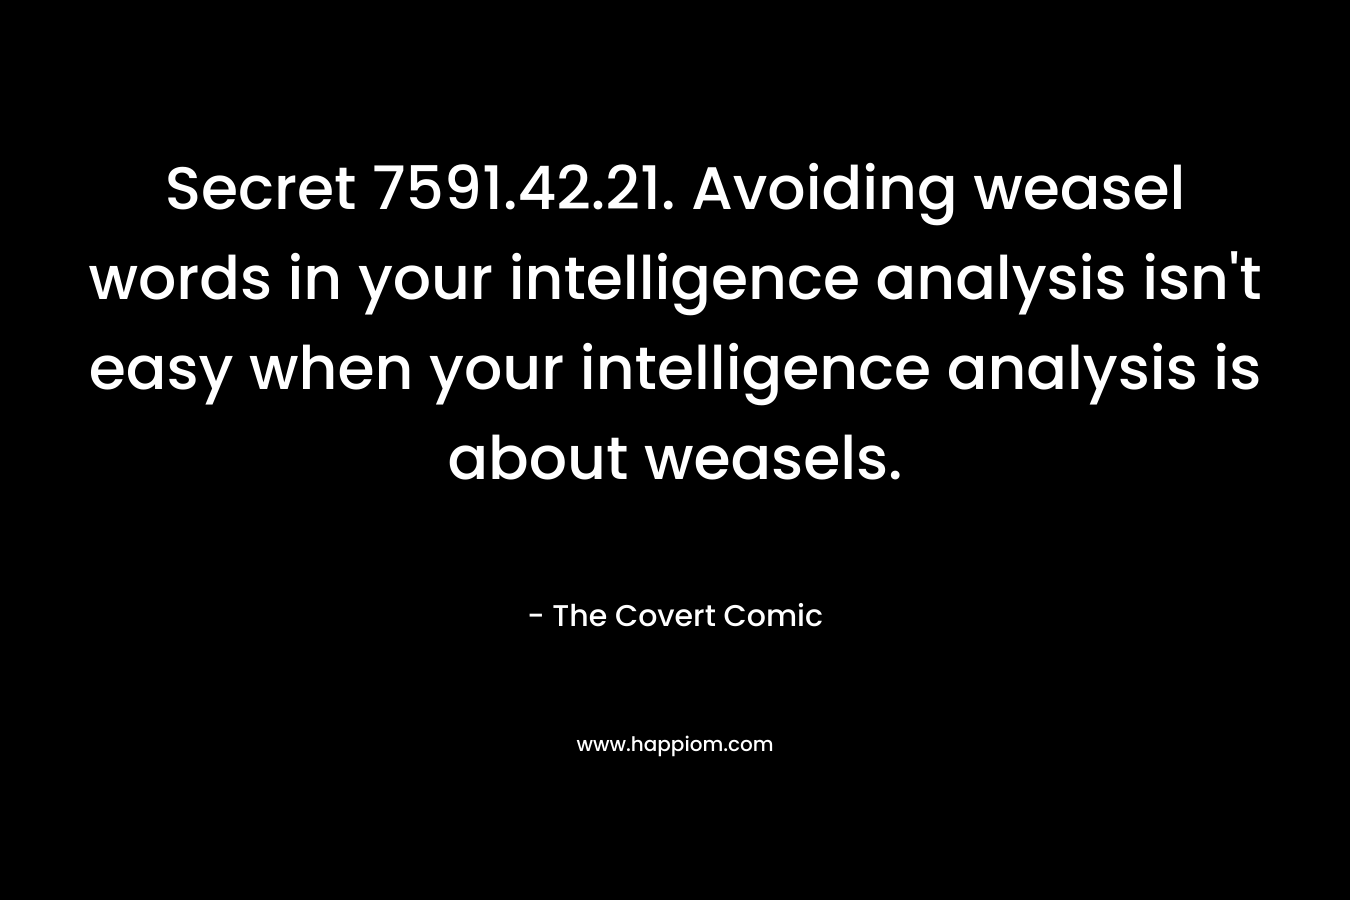 Secret 7591.42.21. Avoiding weasel words in your intelligence analysis isn’t easy when your intelligence analysis is about weasels. – The Covert Comic